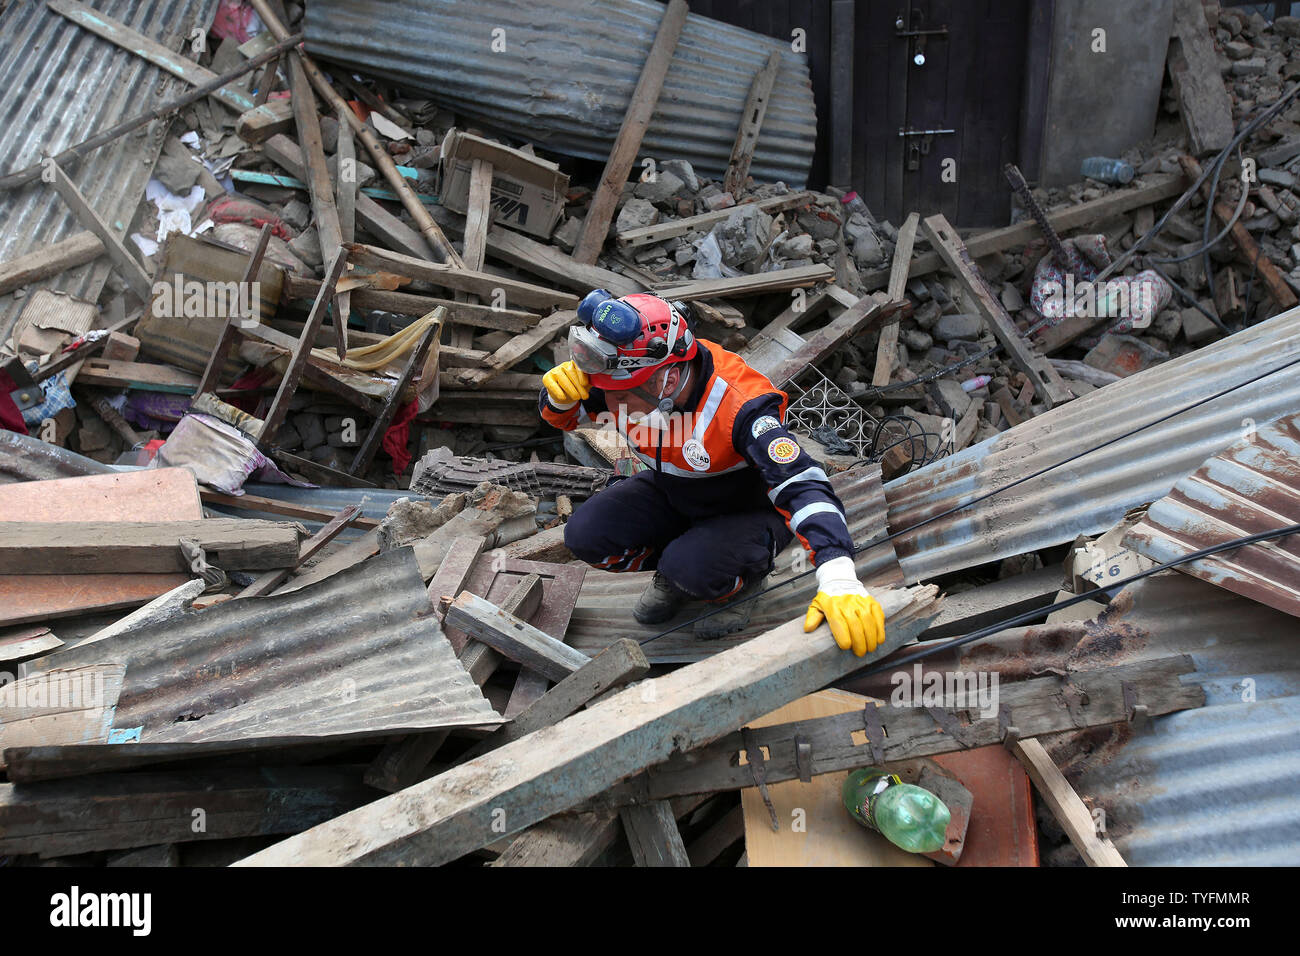 Nepalese rescuers search for victims in the rubble of buildings on April 27, 2015 after a 7.9 earthquake hit the areas in Bhaktapur near Katmandu, Nepal.  The death toll climbed to more than 3,000 with more than 7,000 injured following the massive earthquake in Nepal on Saturday, April 25, 2015.   Photo by Sanjog Manandhar/ UPI Stock Photo